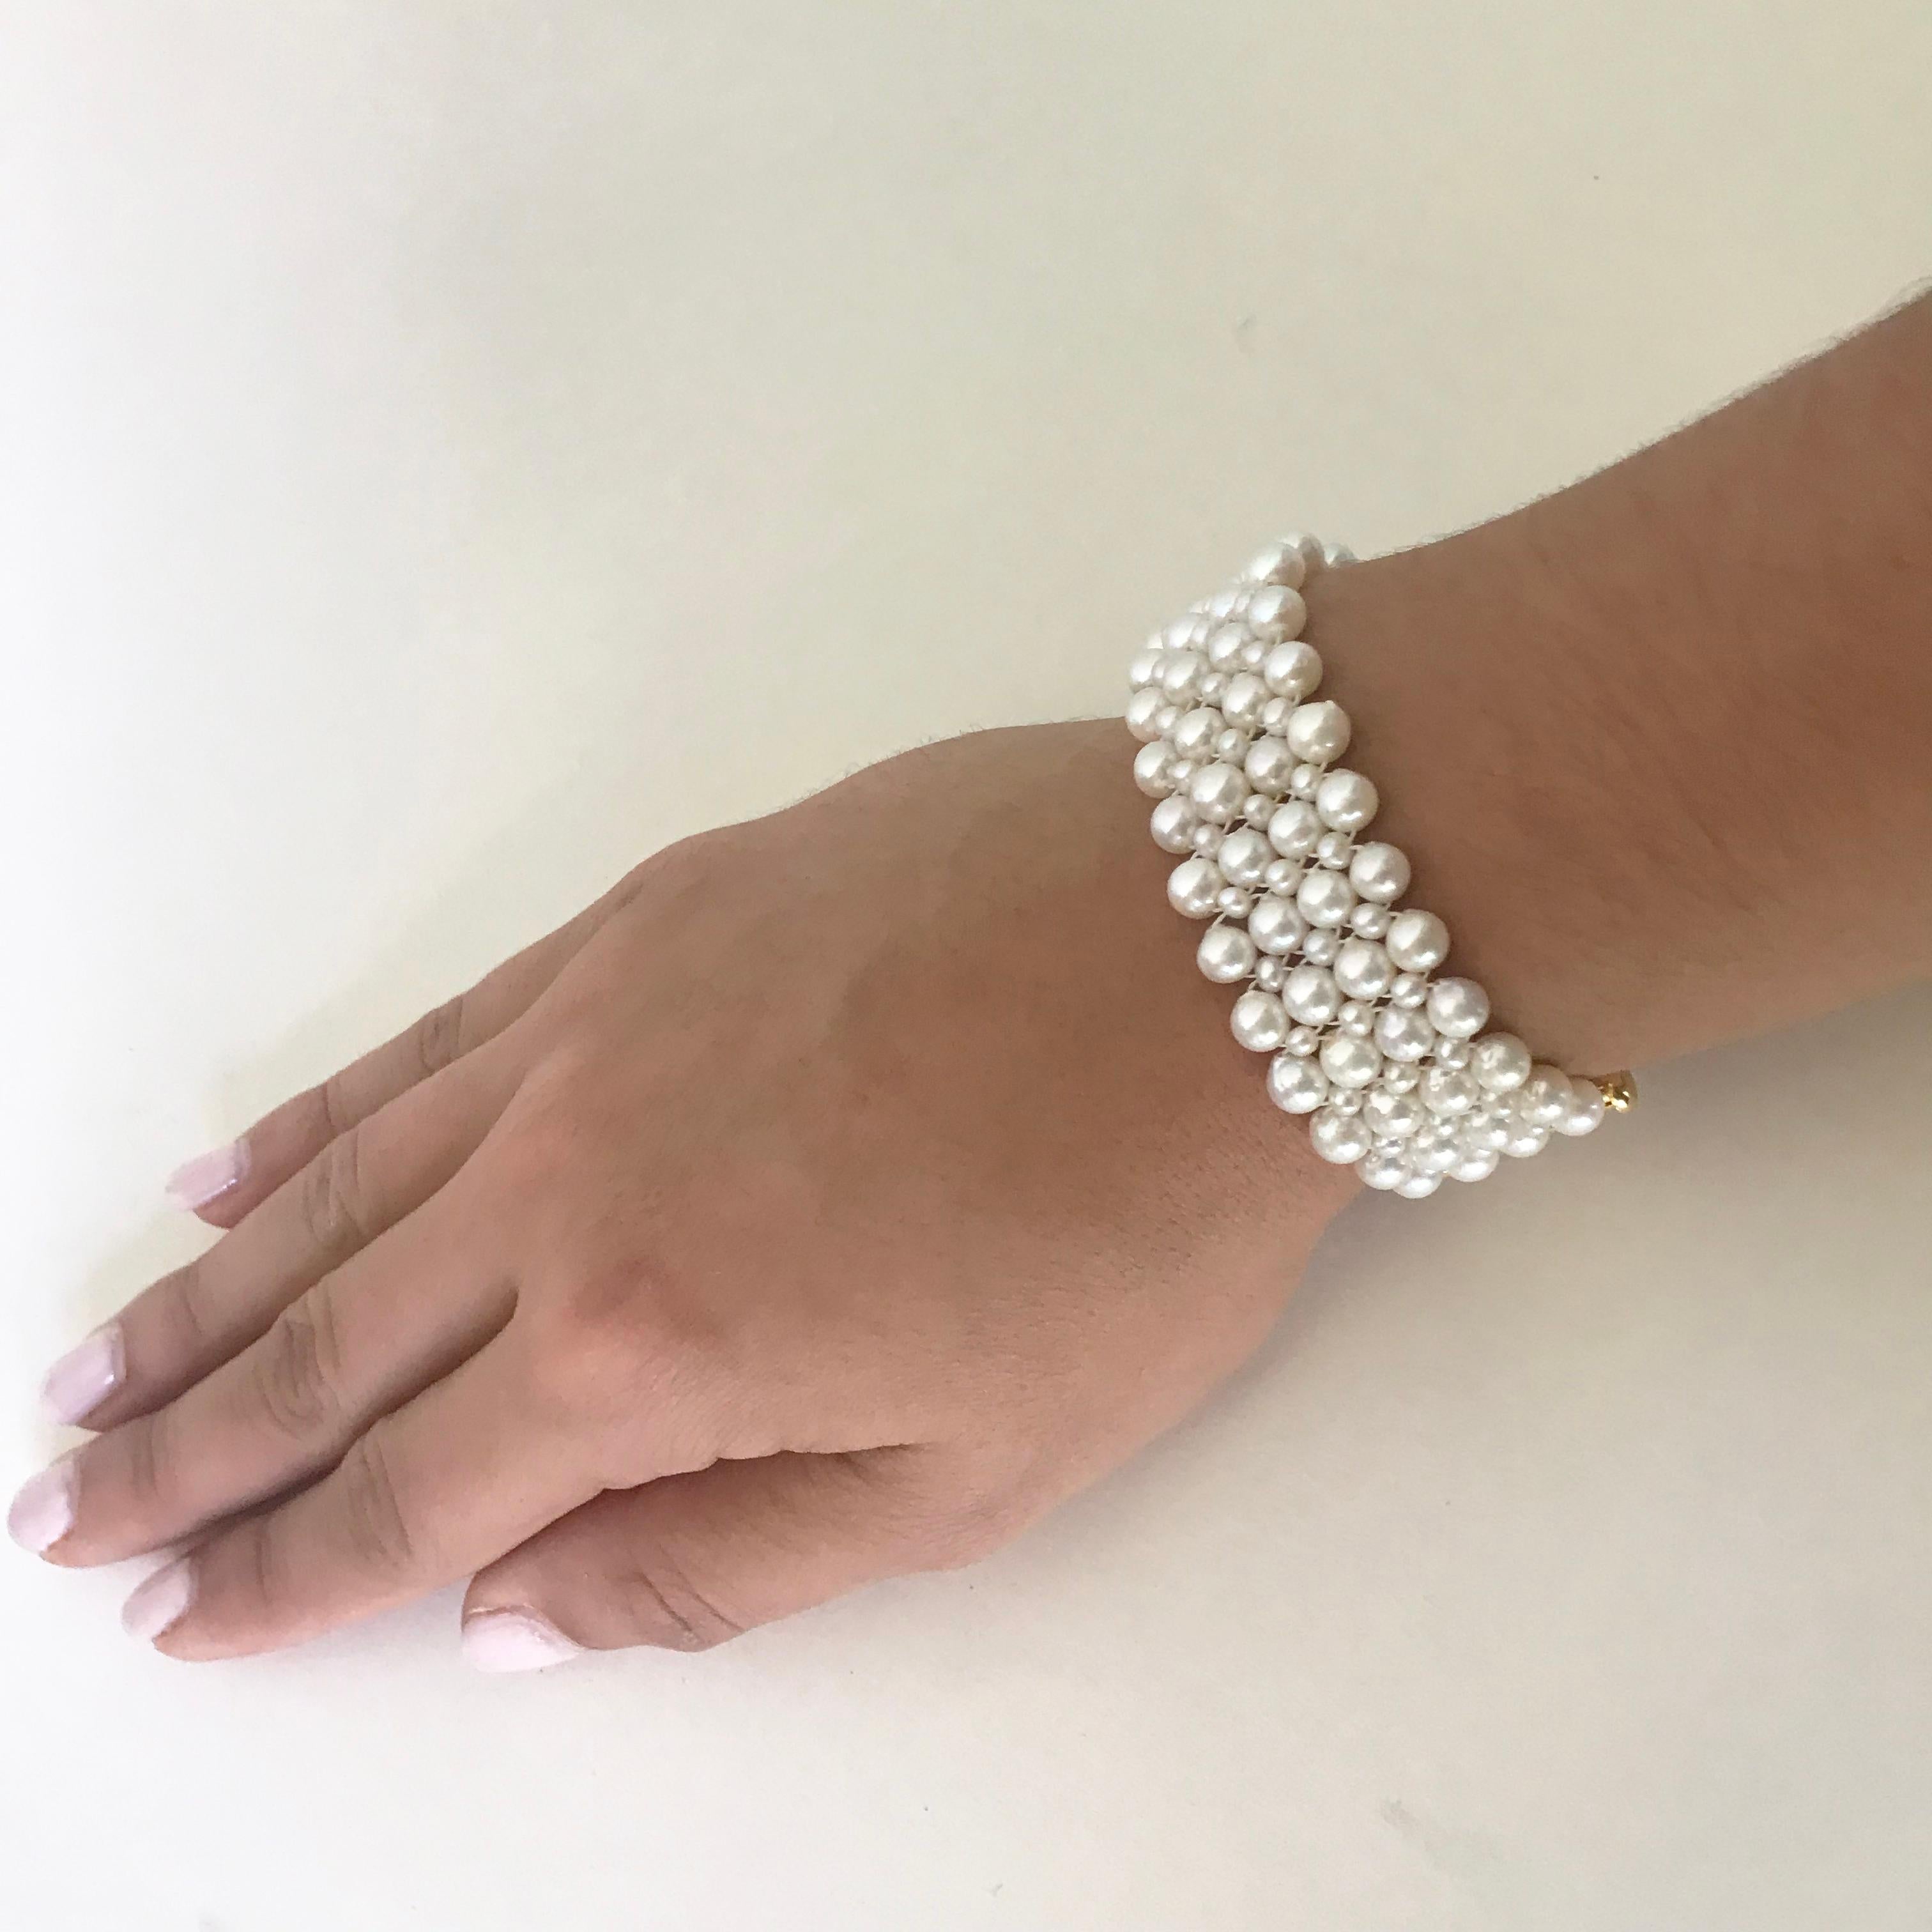 This beautiful, classic and timeless bracelet has elegant pearl weave. At a 1 inch wide the different size pearls (5mm to 2mm) create a checkered design with the sterling silver yellow gold plated clasp.  It is easy to use and secure once fitted on